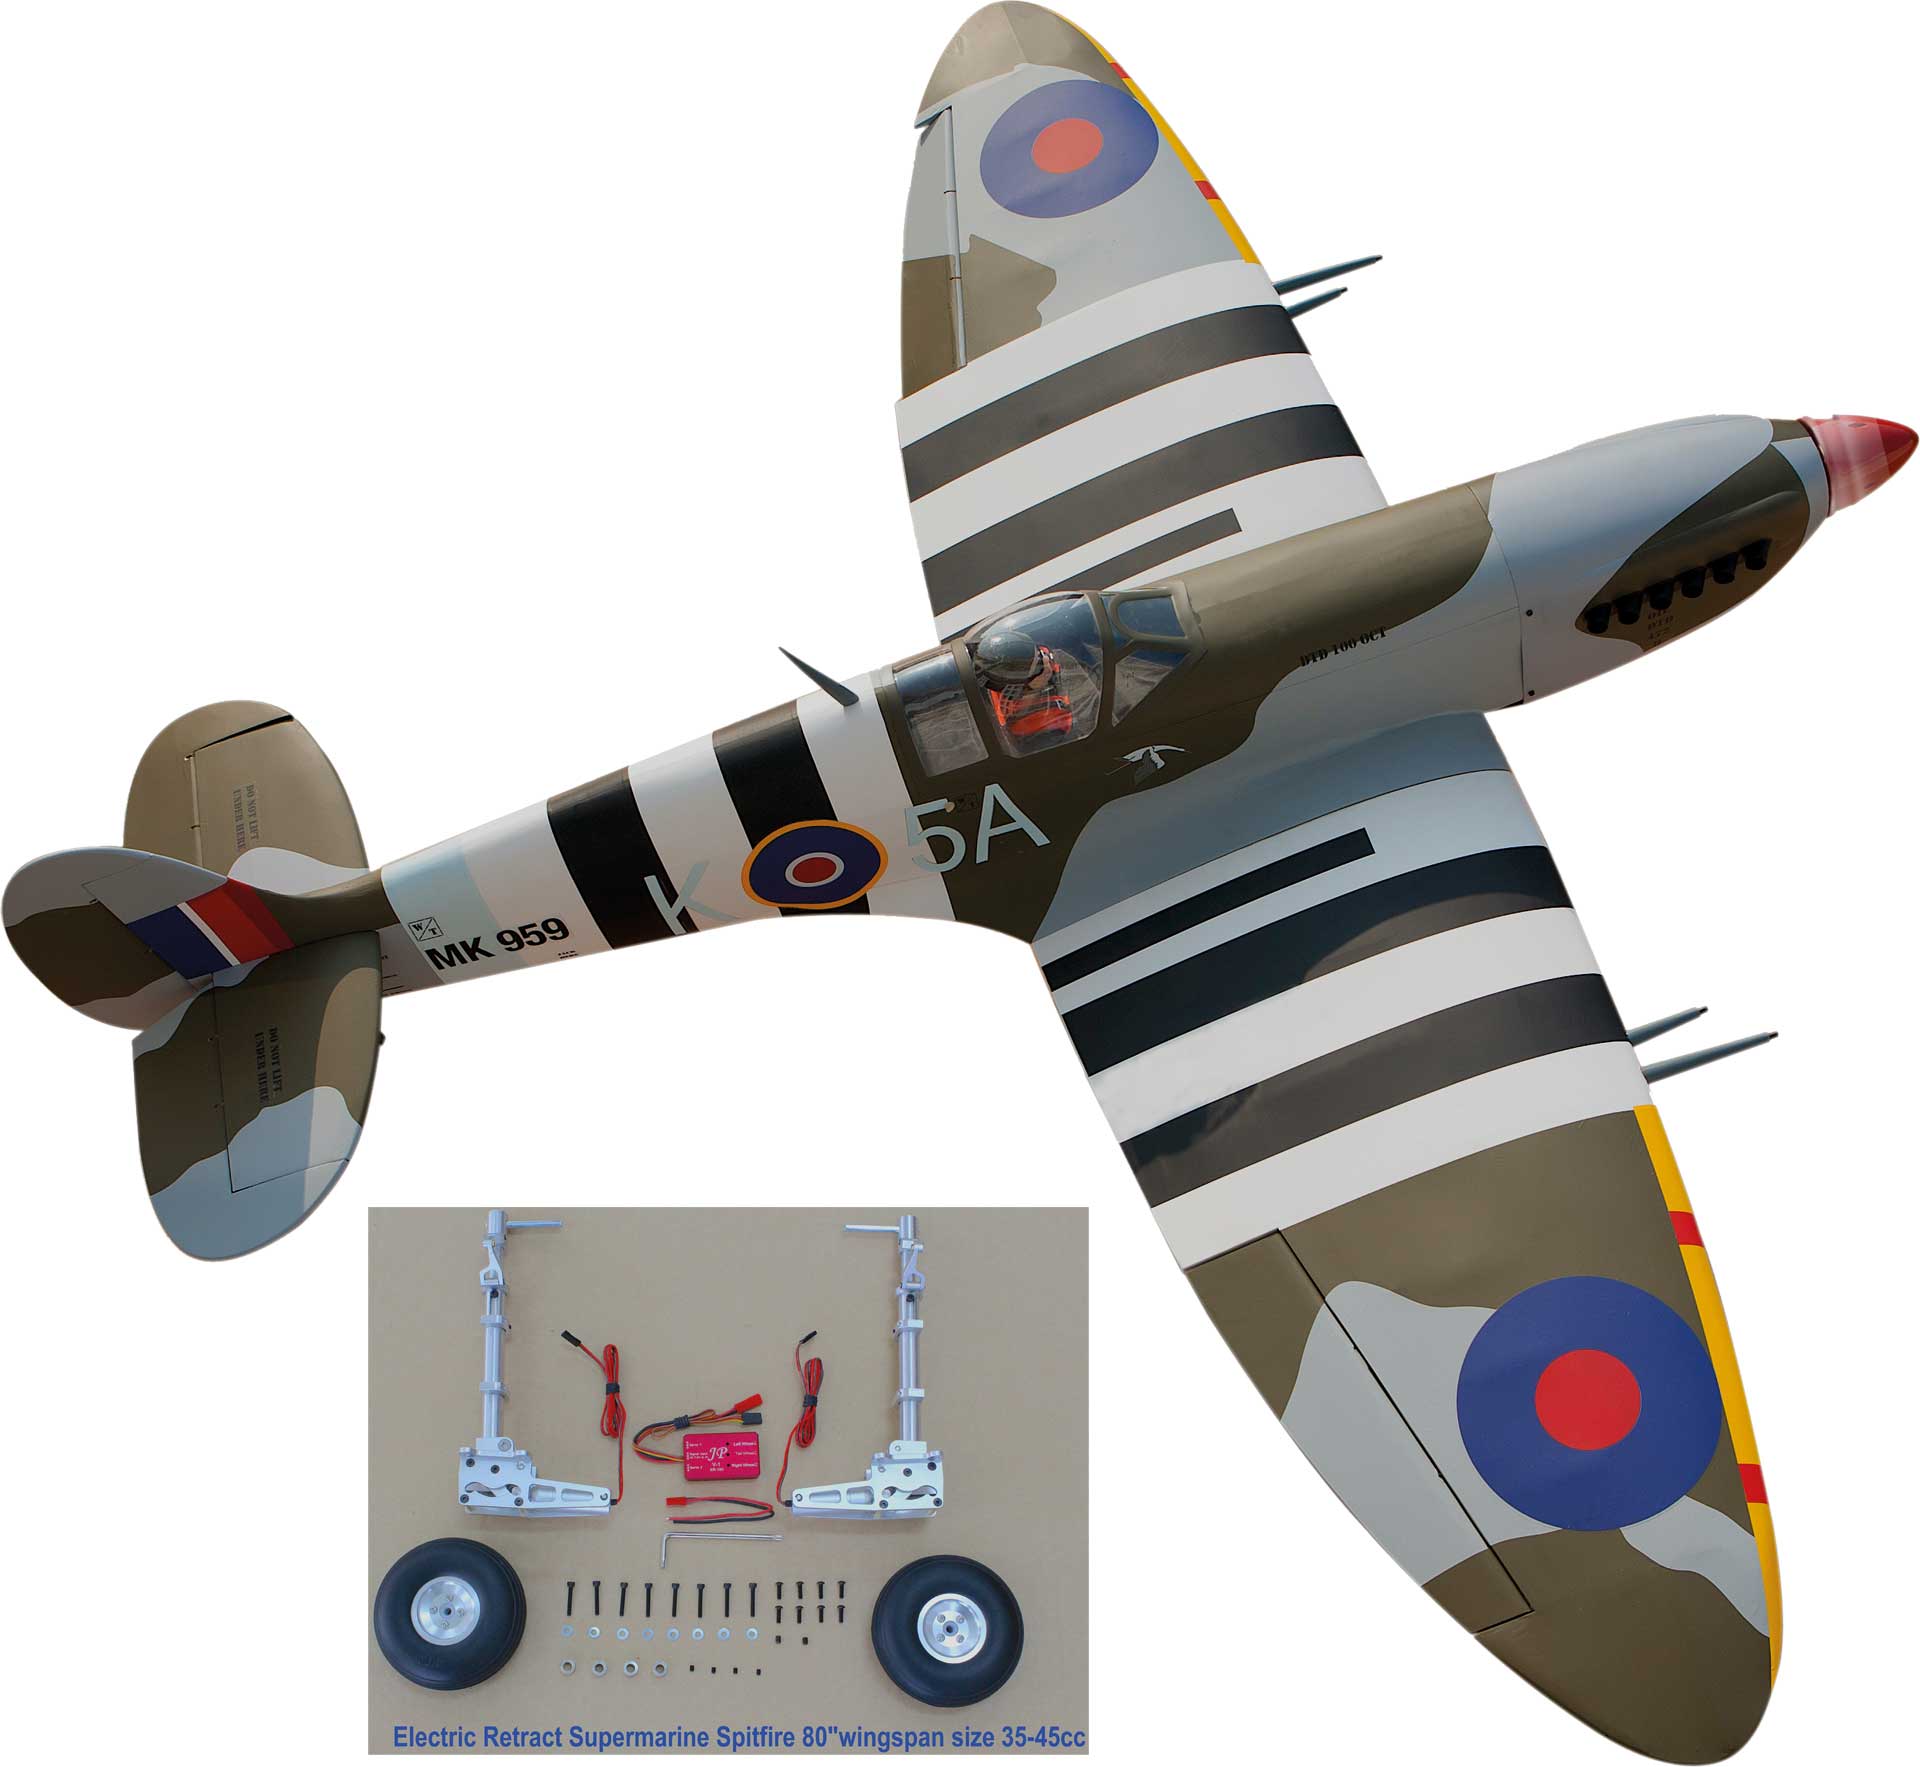 Seagull Models ( SG-Models ) Spitfire 80" 35-45ccm with Electric 95°Retracts landing gear